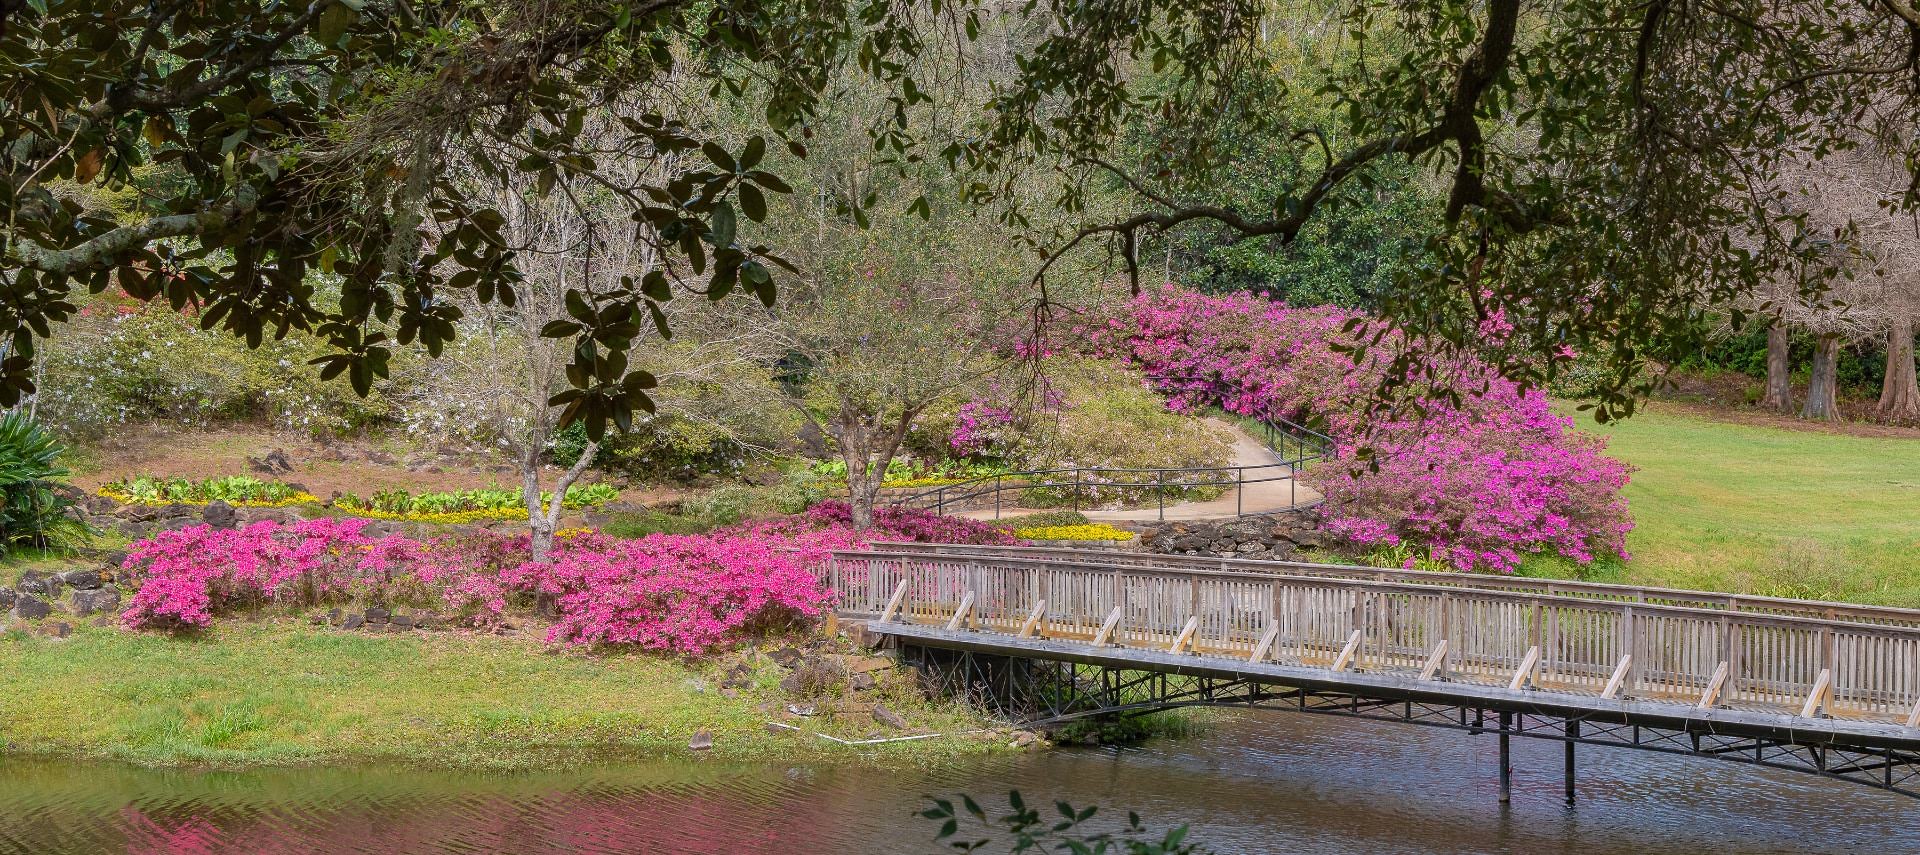 Small river with bridge surrounded by nicely cut grass, trees, and bushes with bright pink flowers